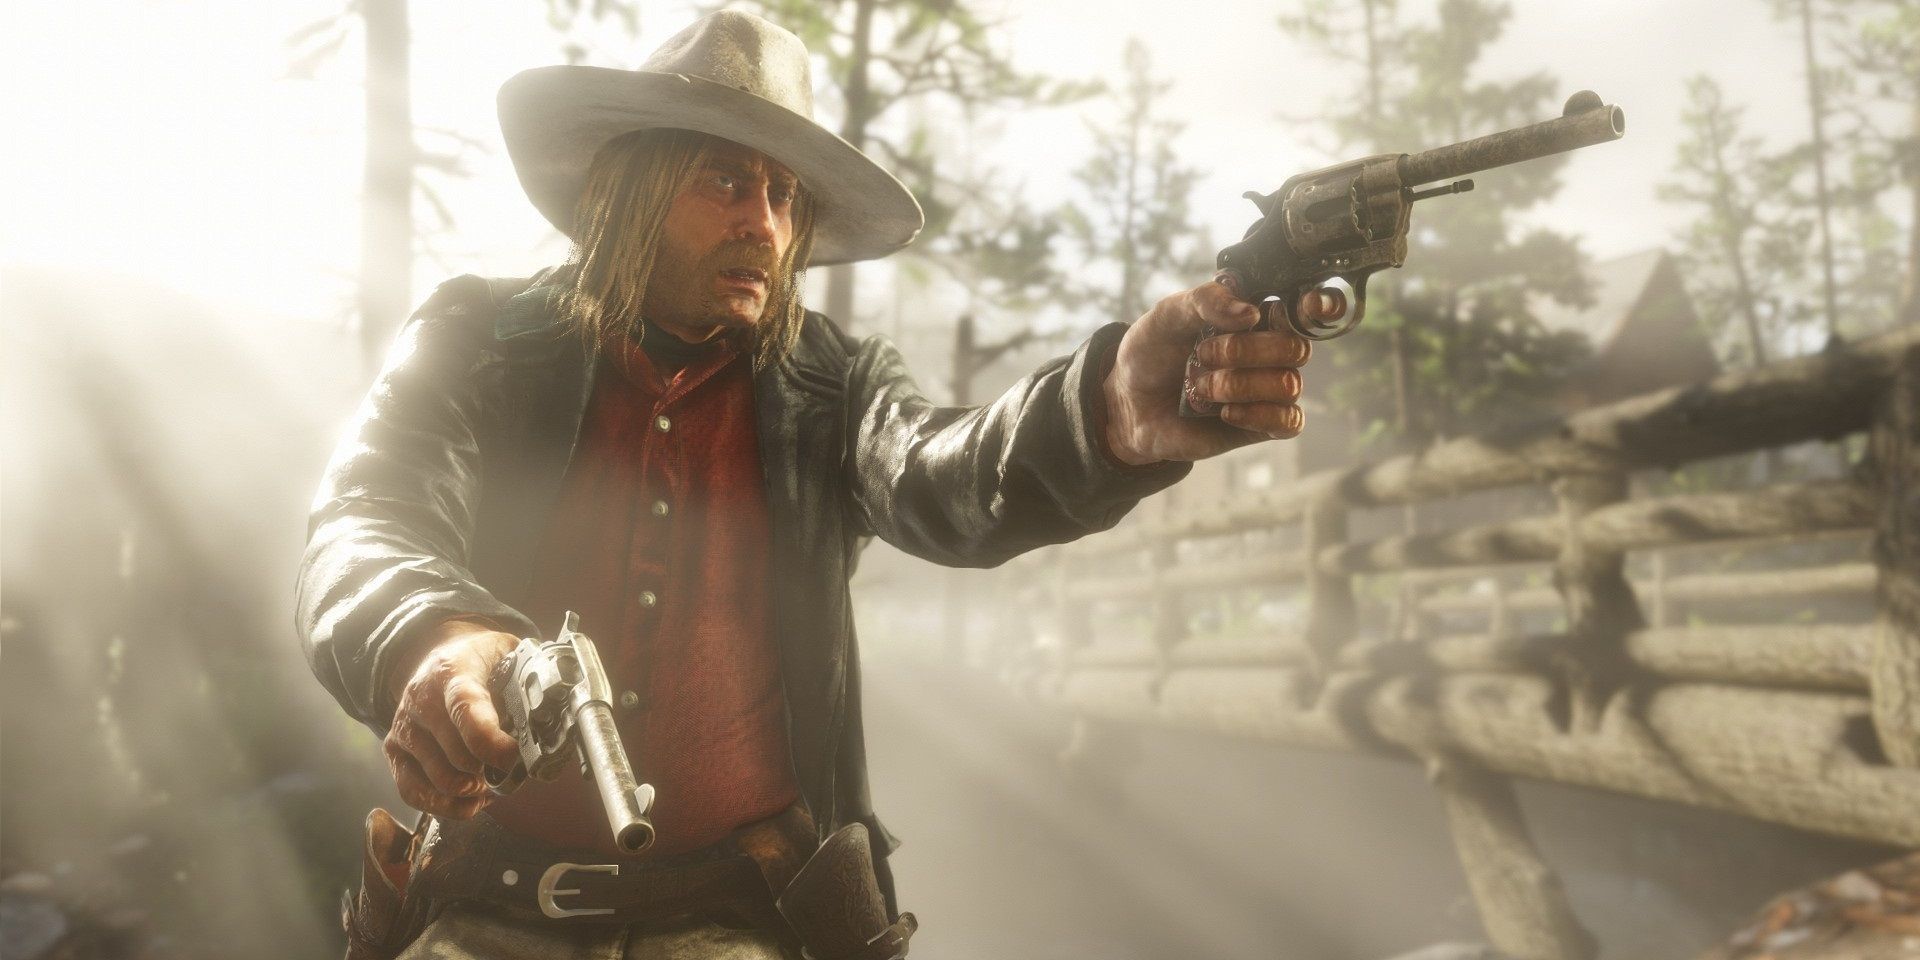 Micah carries a twin pair double-action revolvers, with red skulls on the grips and 